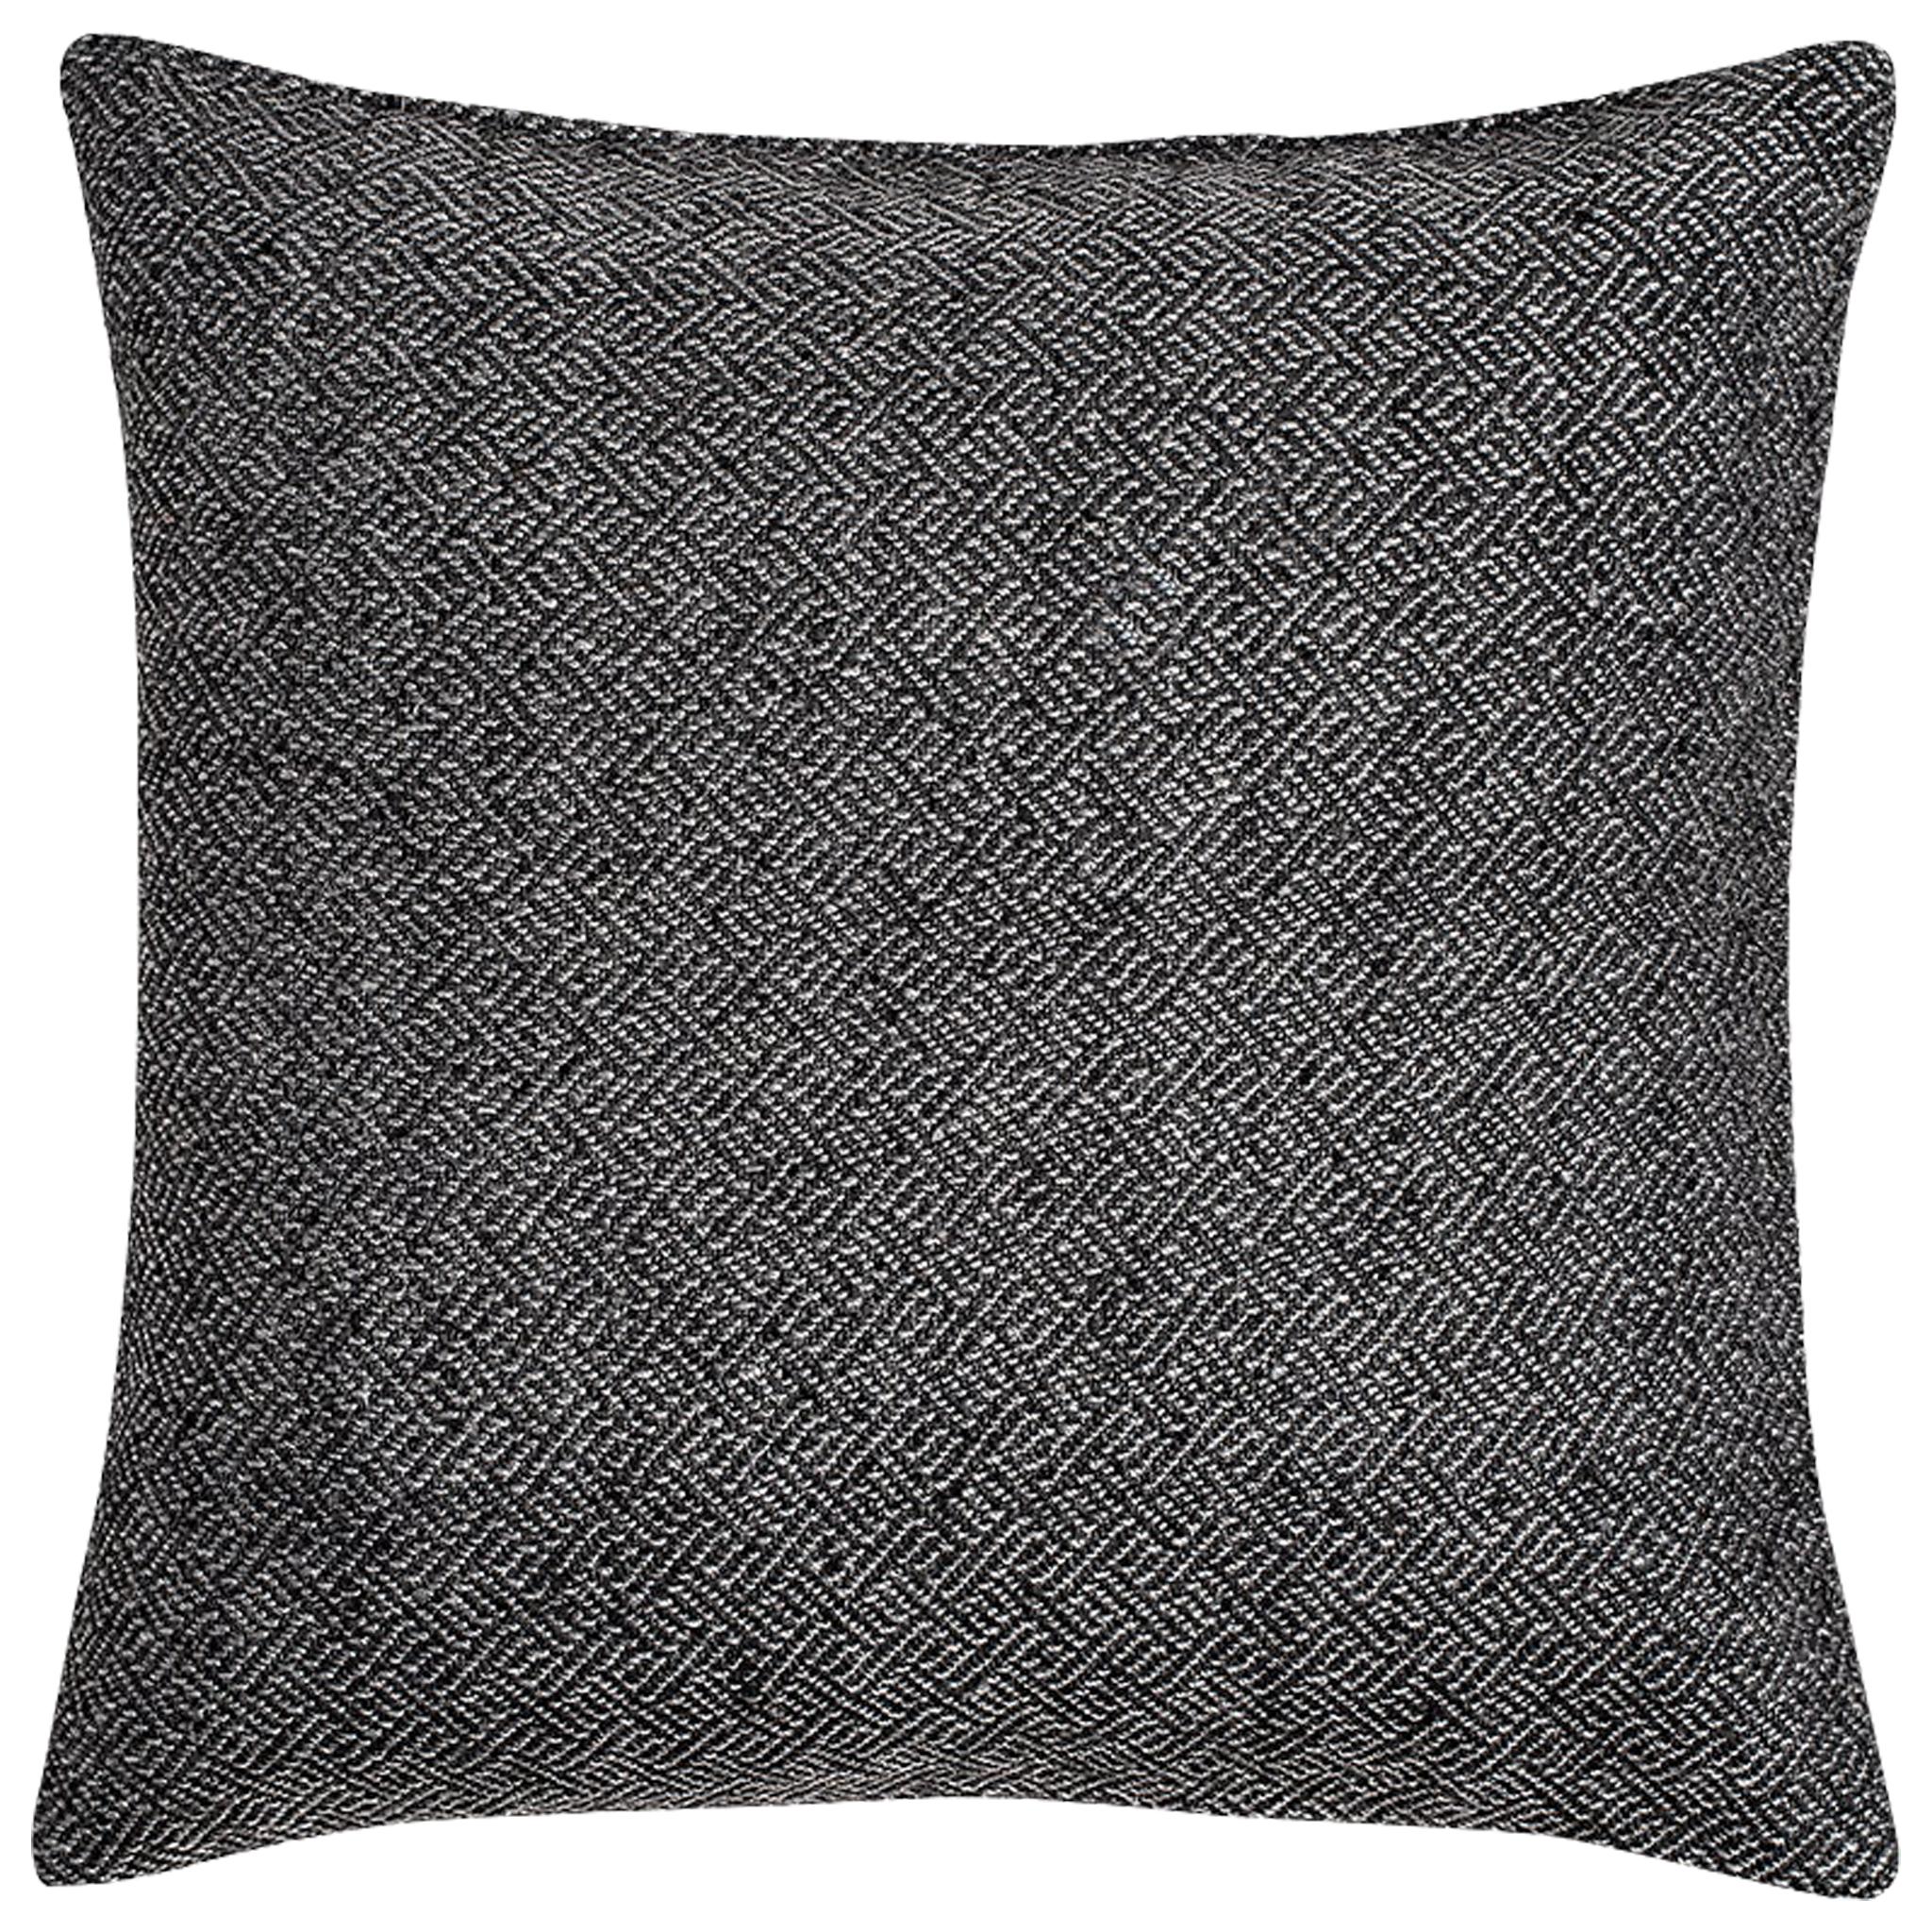 Ben Soleimani Angled Diamond Pillow Cover - Charcoal 22"x22" For Sale